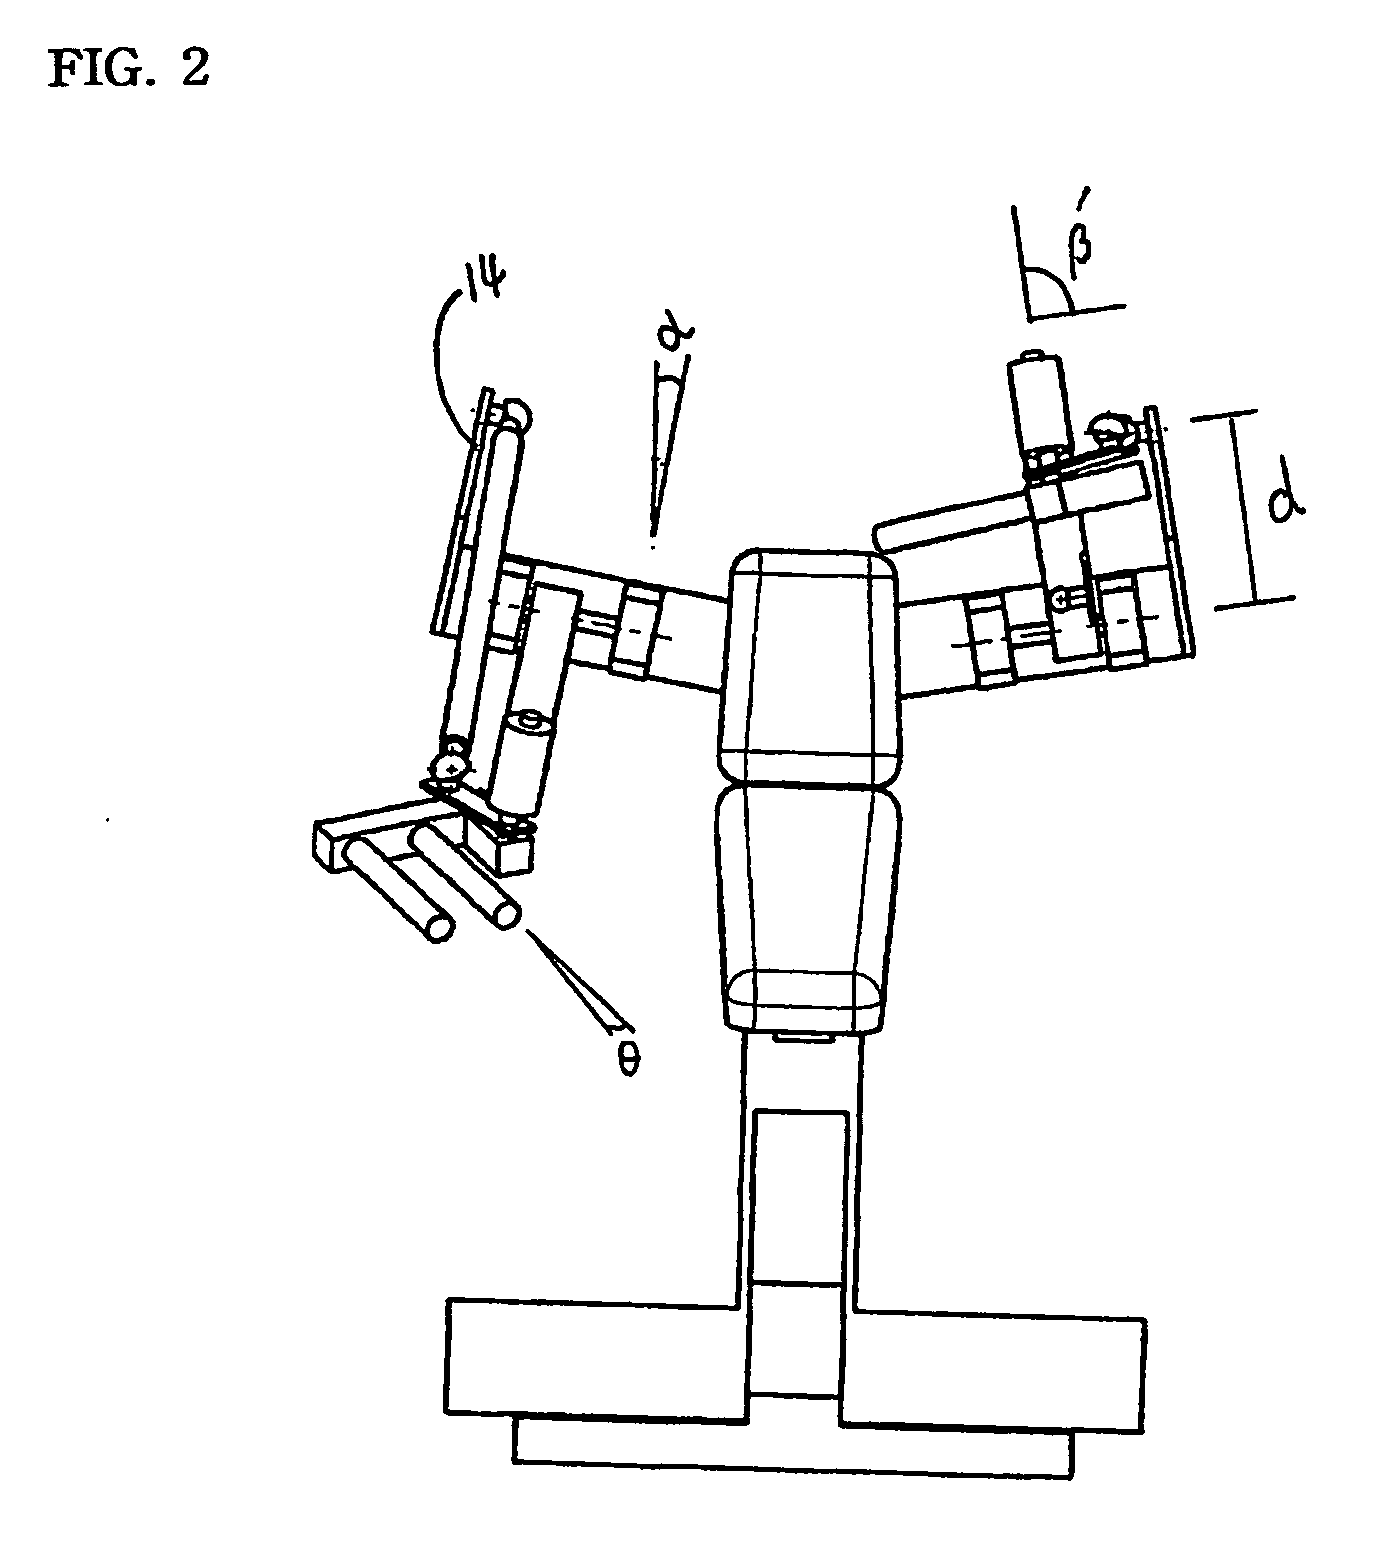 Apparatus for three-dimensional anaerobic exercise